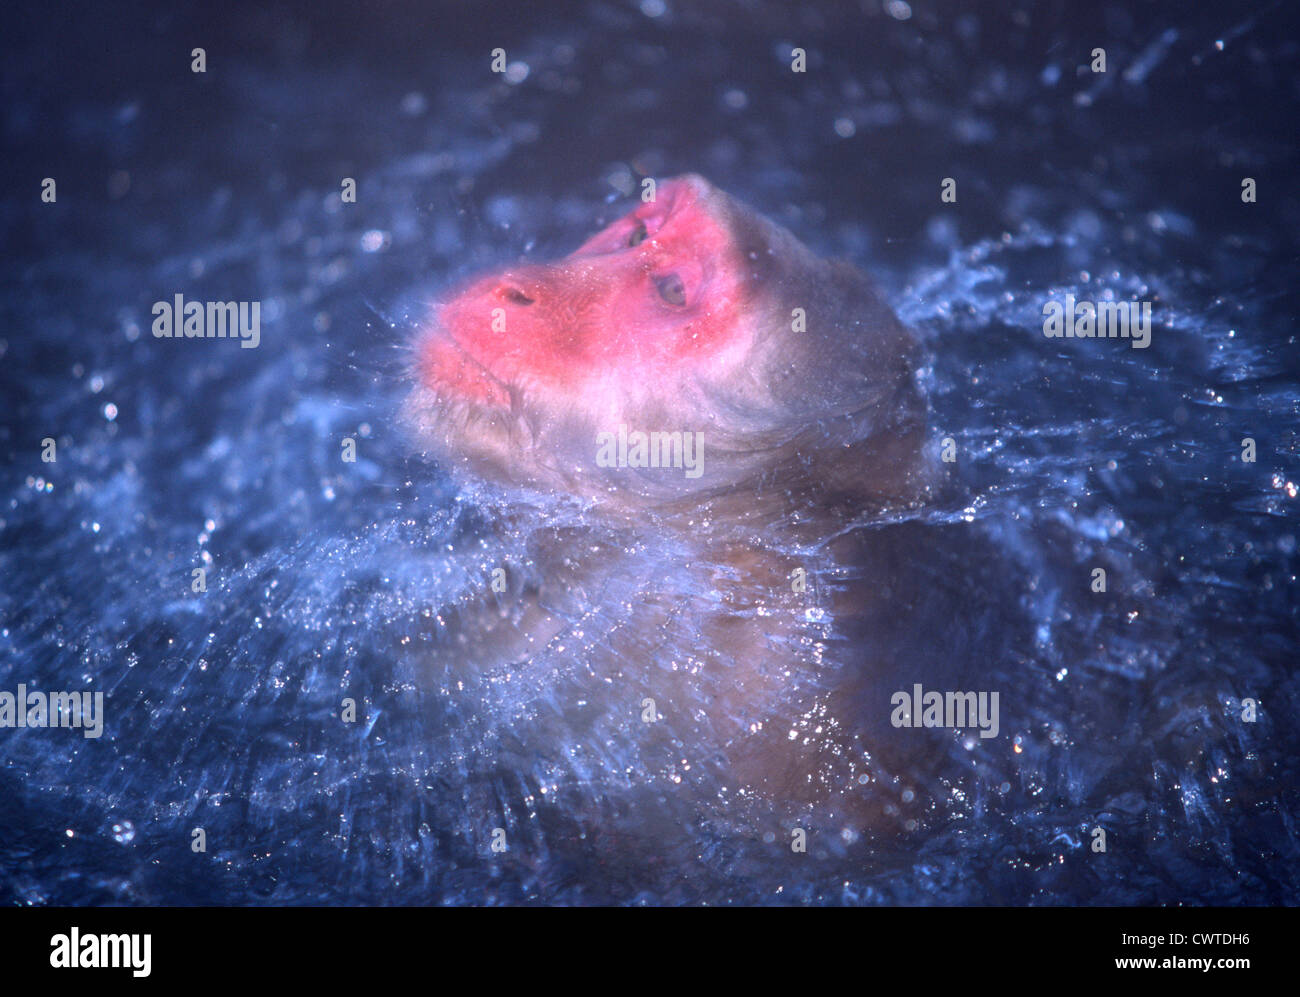 MACAQUE SURFACES AND SHAKES WATER FROM HEAD IN THE HOT SPRING POOL.ALPS,JAPAN. Stock Photo